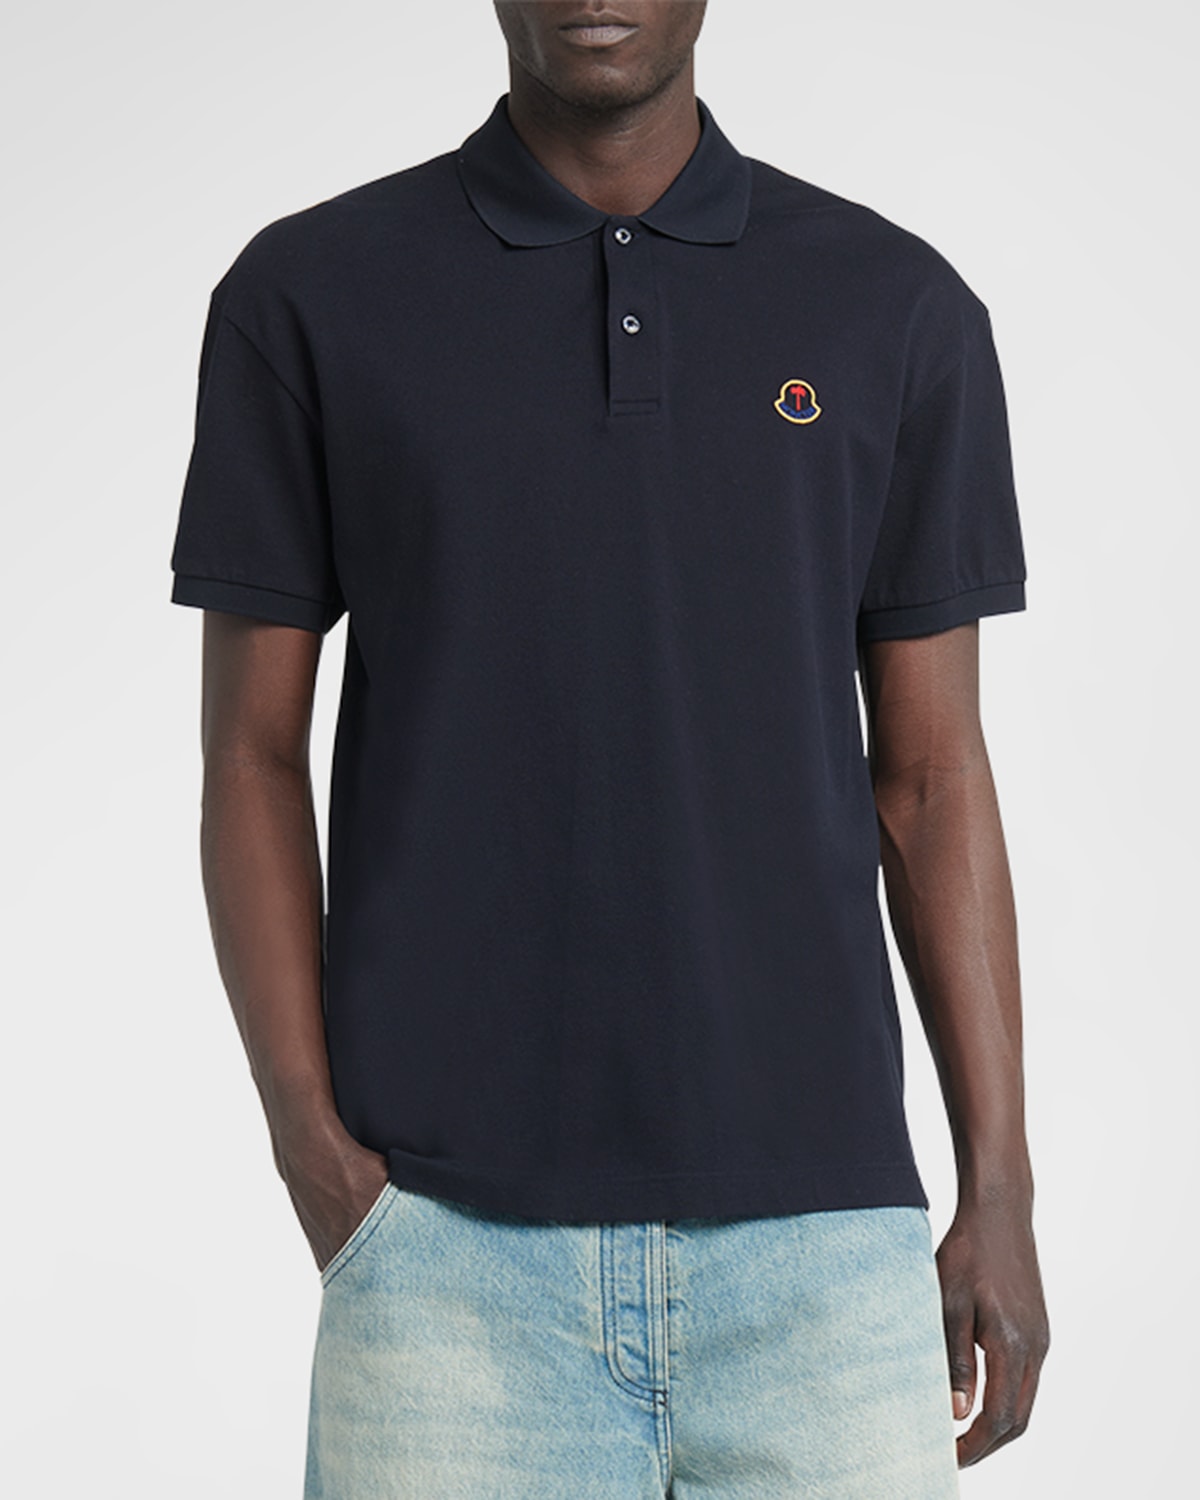 Moncler Genius Moncler X Palm Angels Men's Embroidered Crest Logo Polo Shirt In Navy